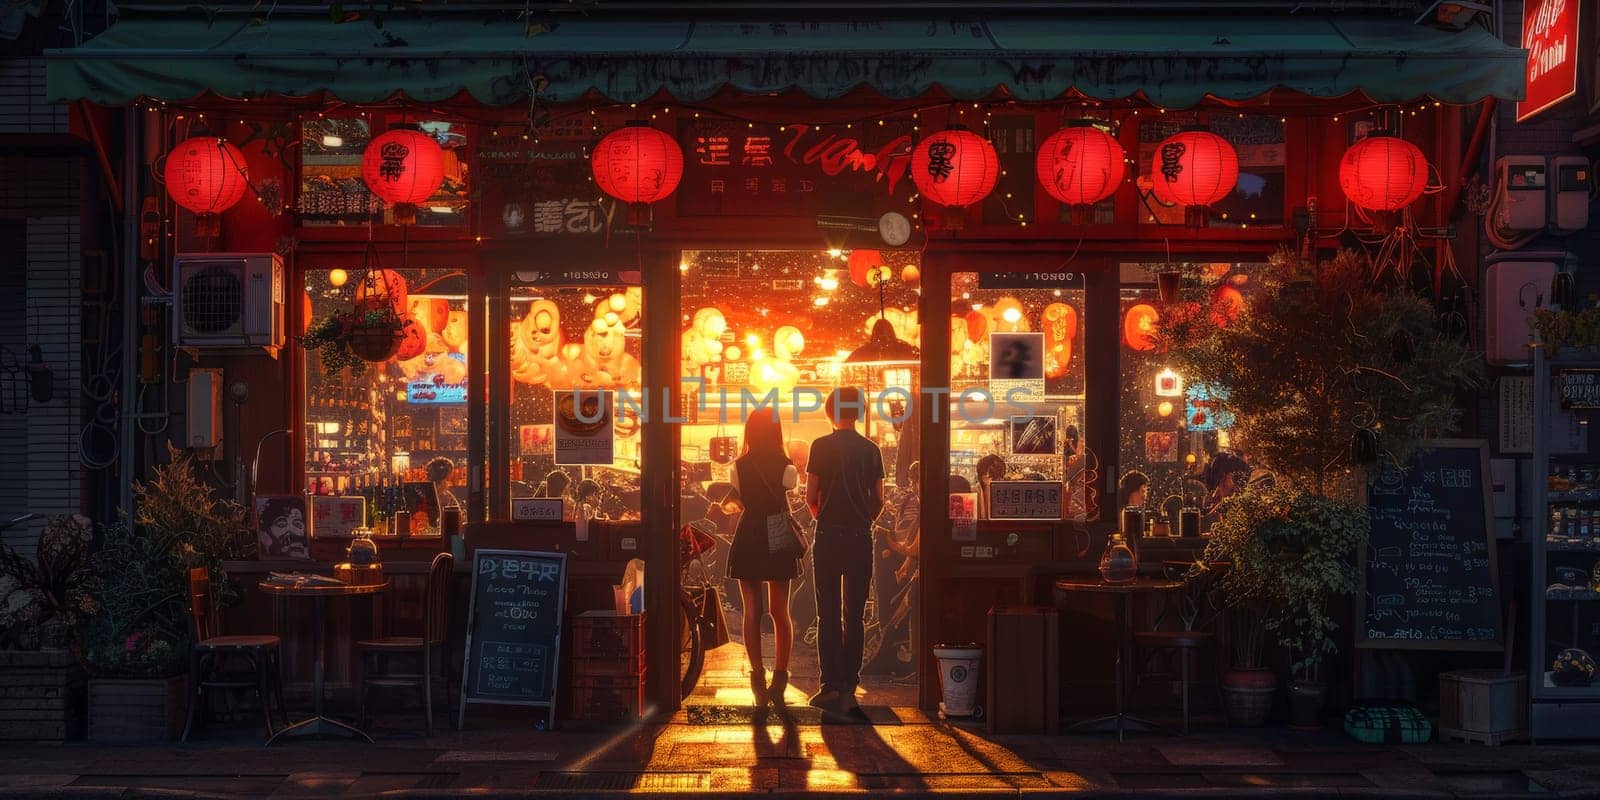 Amber and Orange lighting from the red lanterns illuminate the facade of the store as a man and woman stand in the city at evening, enjoying the entertainment event in the darkness